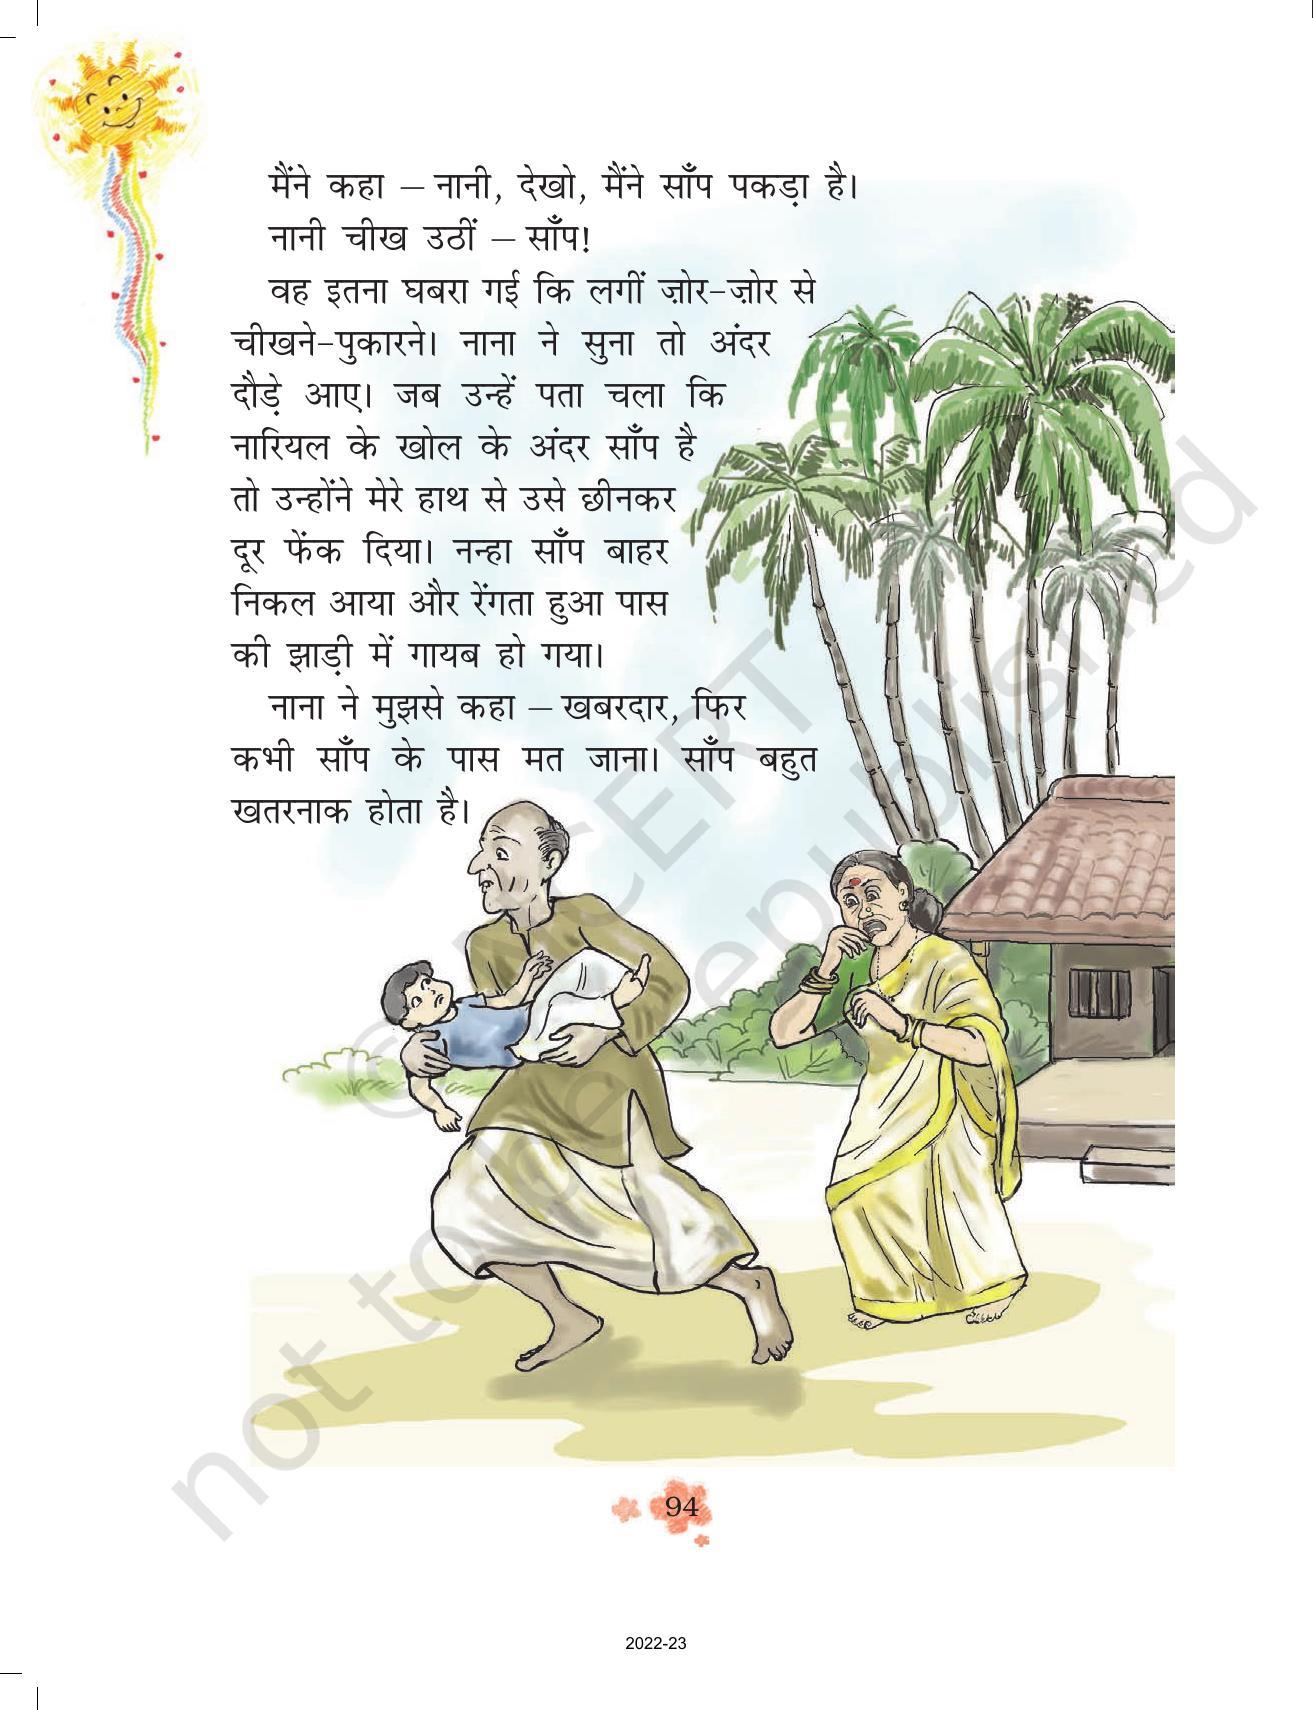 NCERT Book for Class 3 Hindi Chapter 10-जब मुझे साँप ने काटा - Page 2